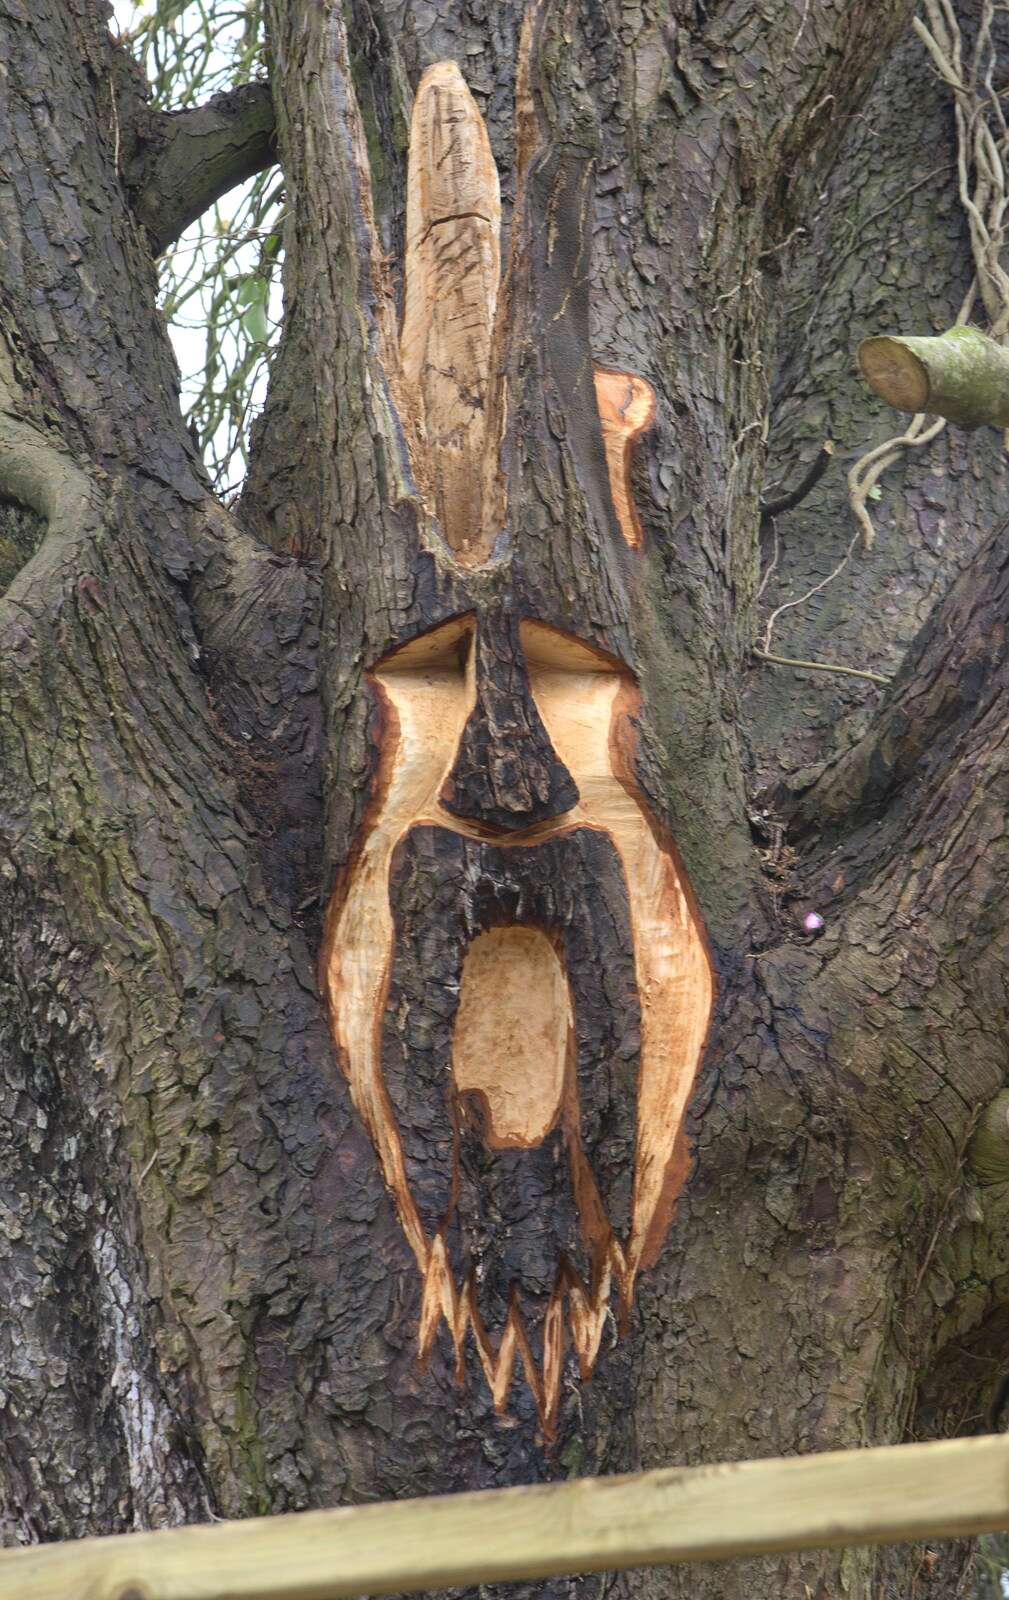 A bearded face in the tree from The Launching of the Jolly Conkerer, The Oaksmere, Brome, Suffolk - 3rd April 2015